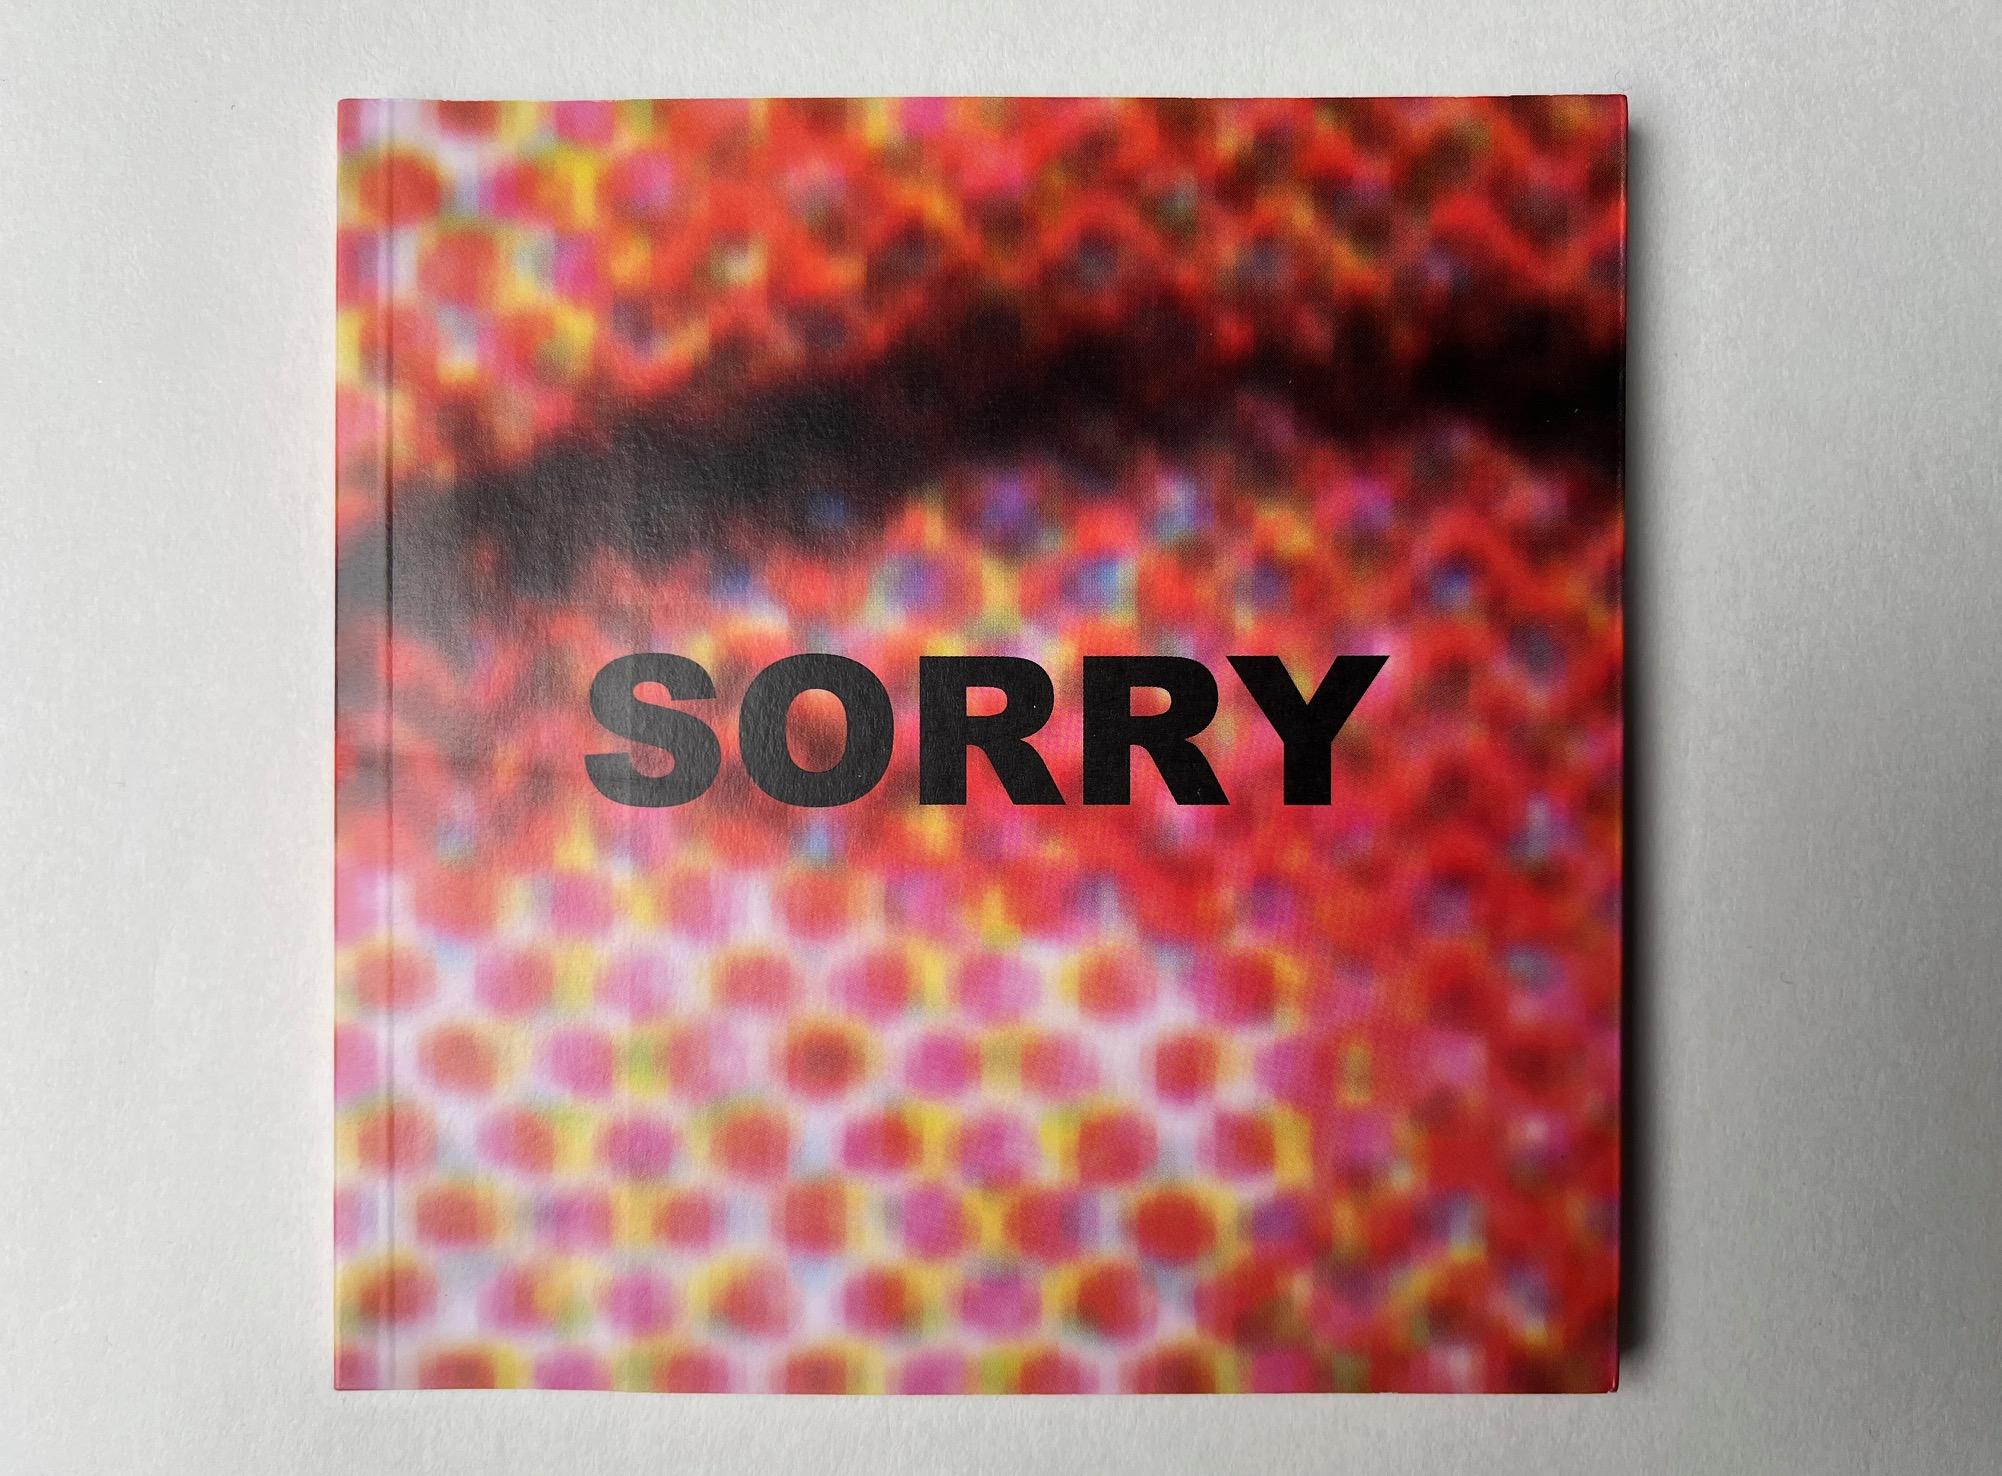 SORRY, 2nd ed, St Mary's University Art Gallery, Halifax, Nova Scotia, COFA Space, with the Centre for Contemporary Art & Politics, College of Fine Arts, University of New South Wales, Sydney, Australia, 2008, 88pp